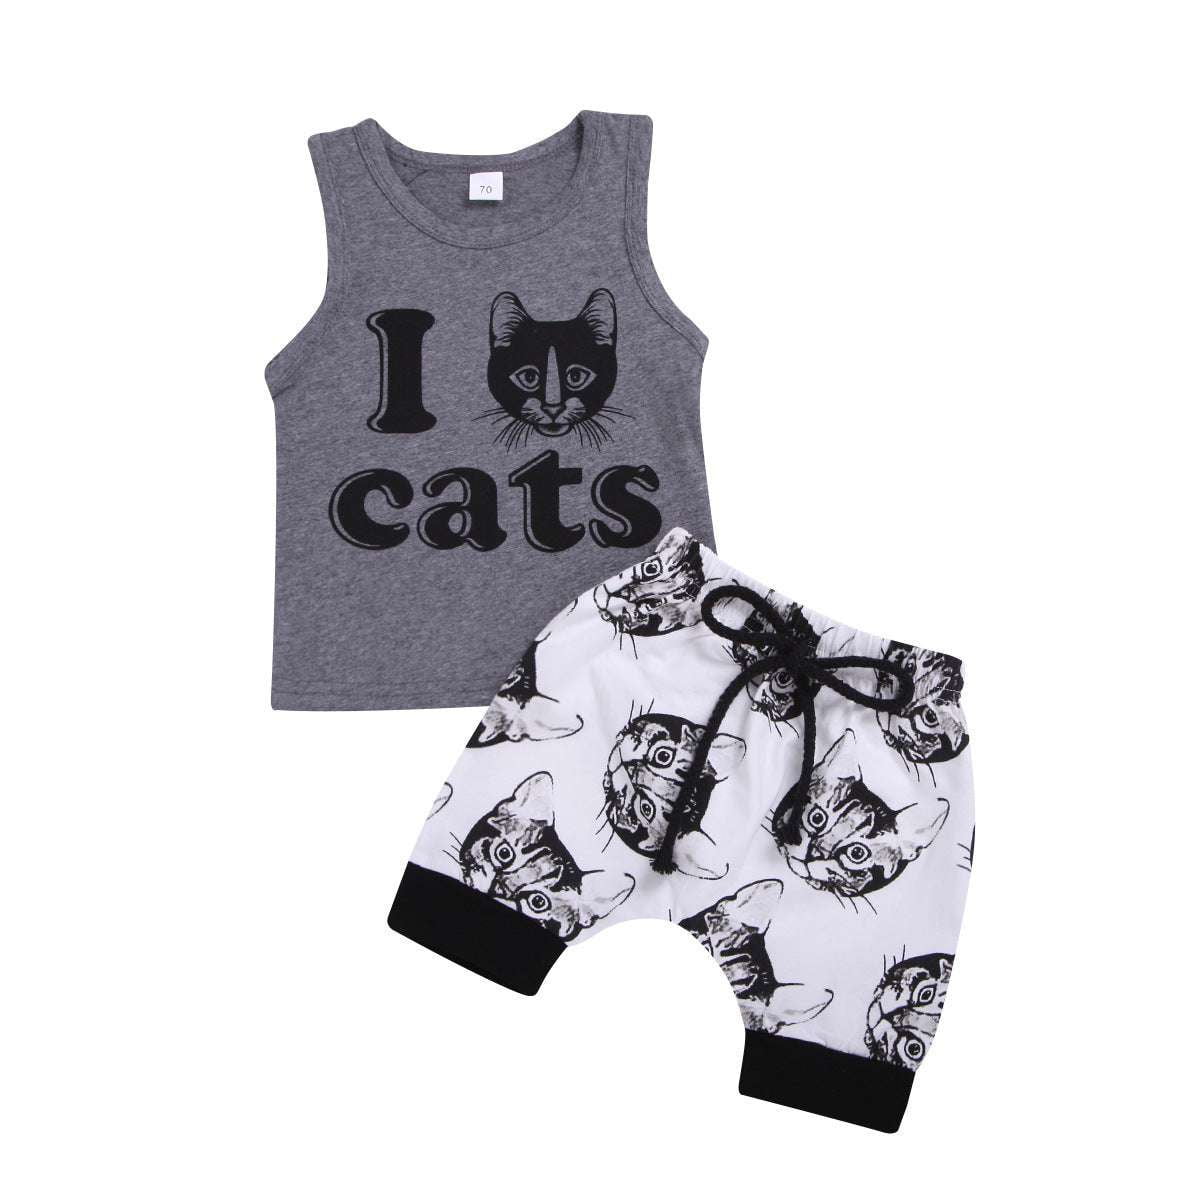 Cat Print Bottoms, Kids Cotton Outfit, Printed Sleeveless Top - available at Sparq Mart